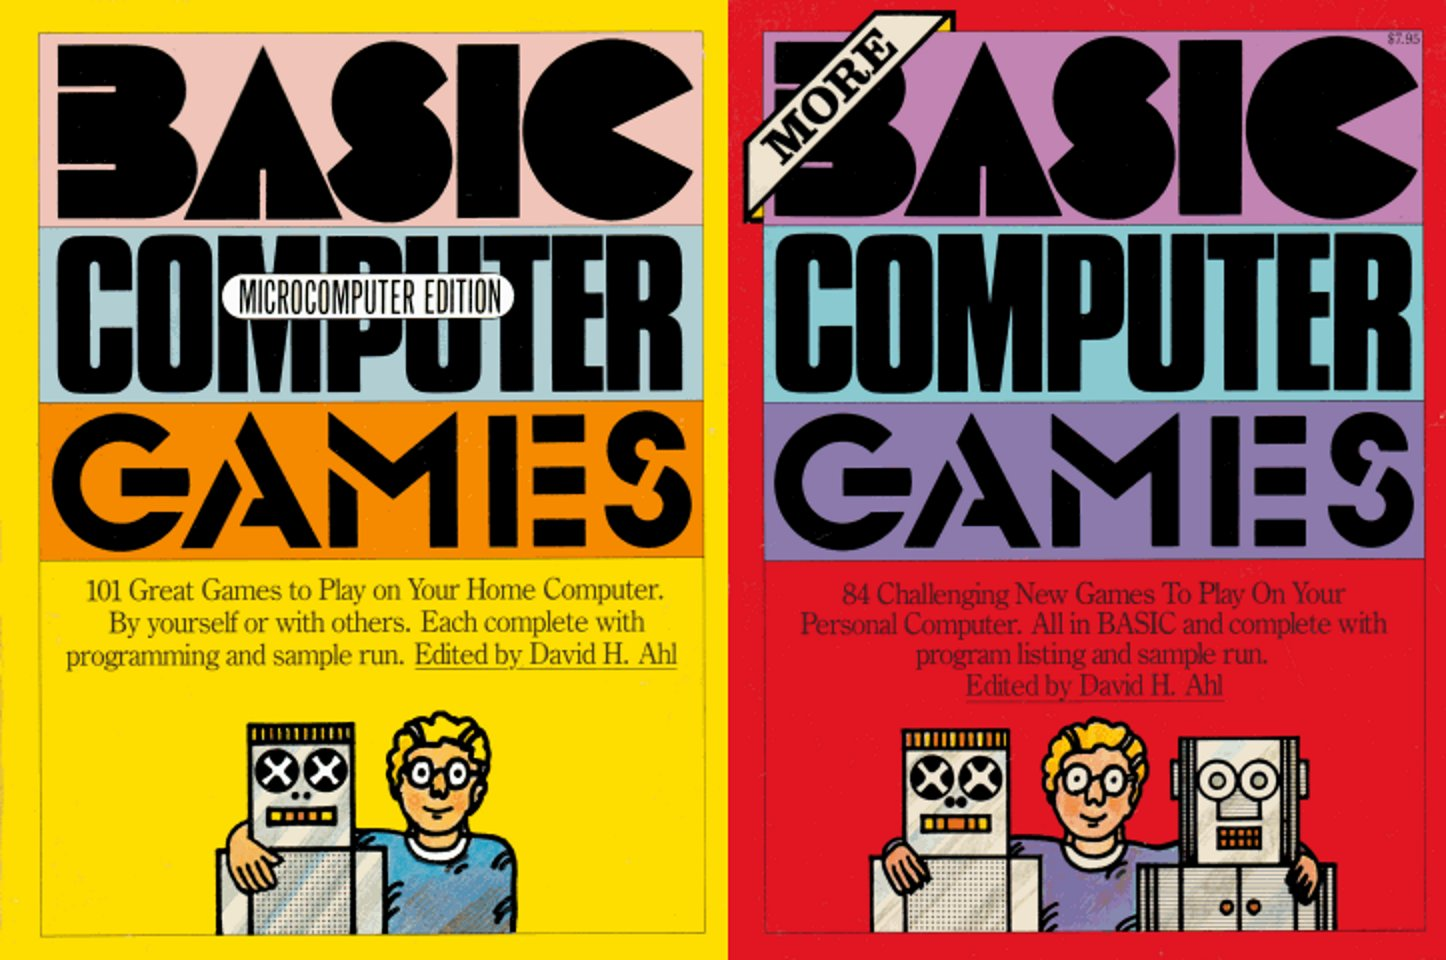 BASIC-Computer-Games-pair-of-book-covers